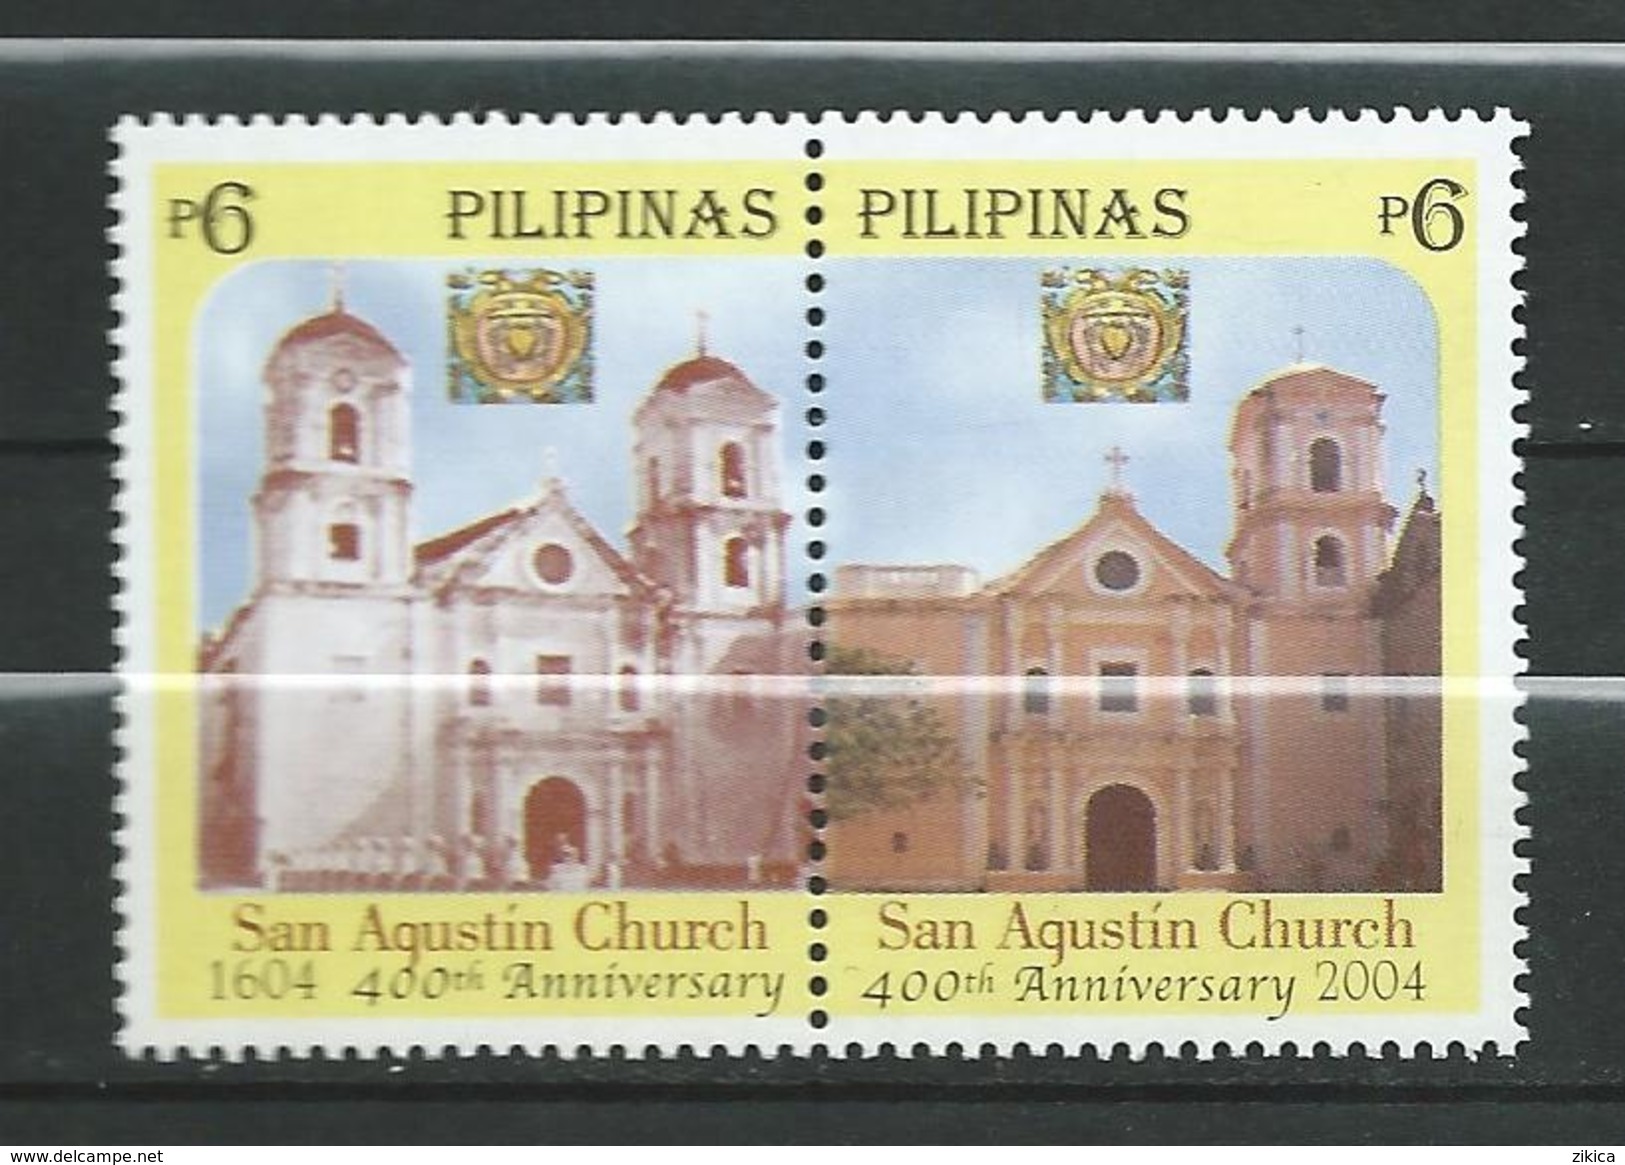 Philippines 2004 The 400th Anniversary Of The San Augustin Church - Manila.MNH - Philippines